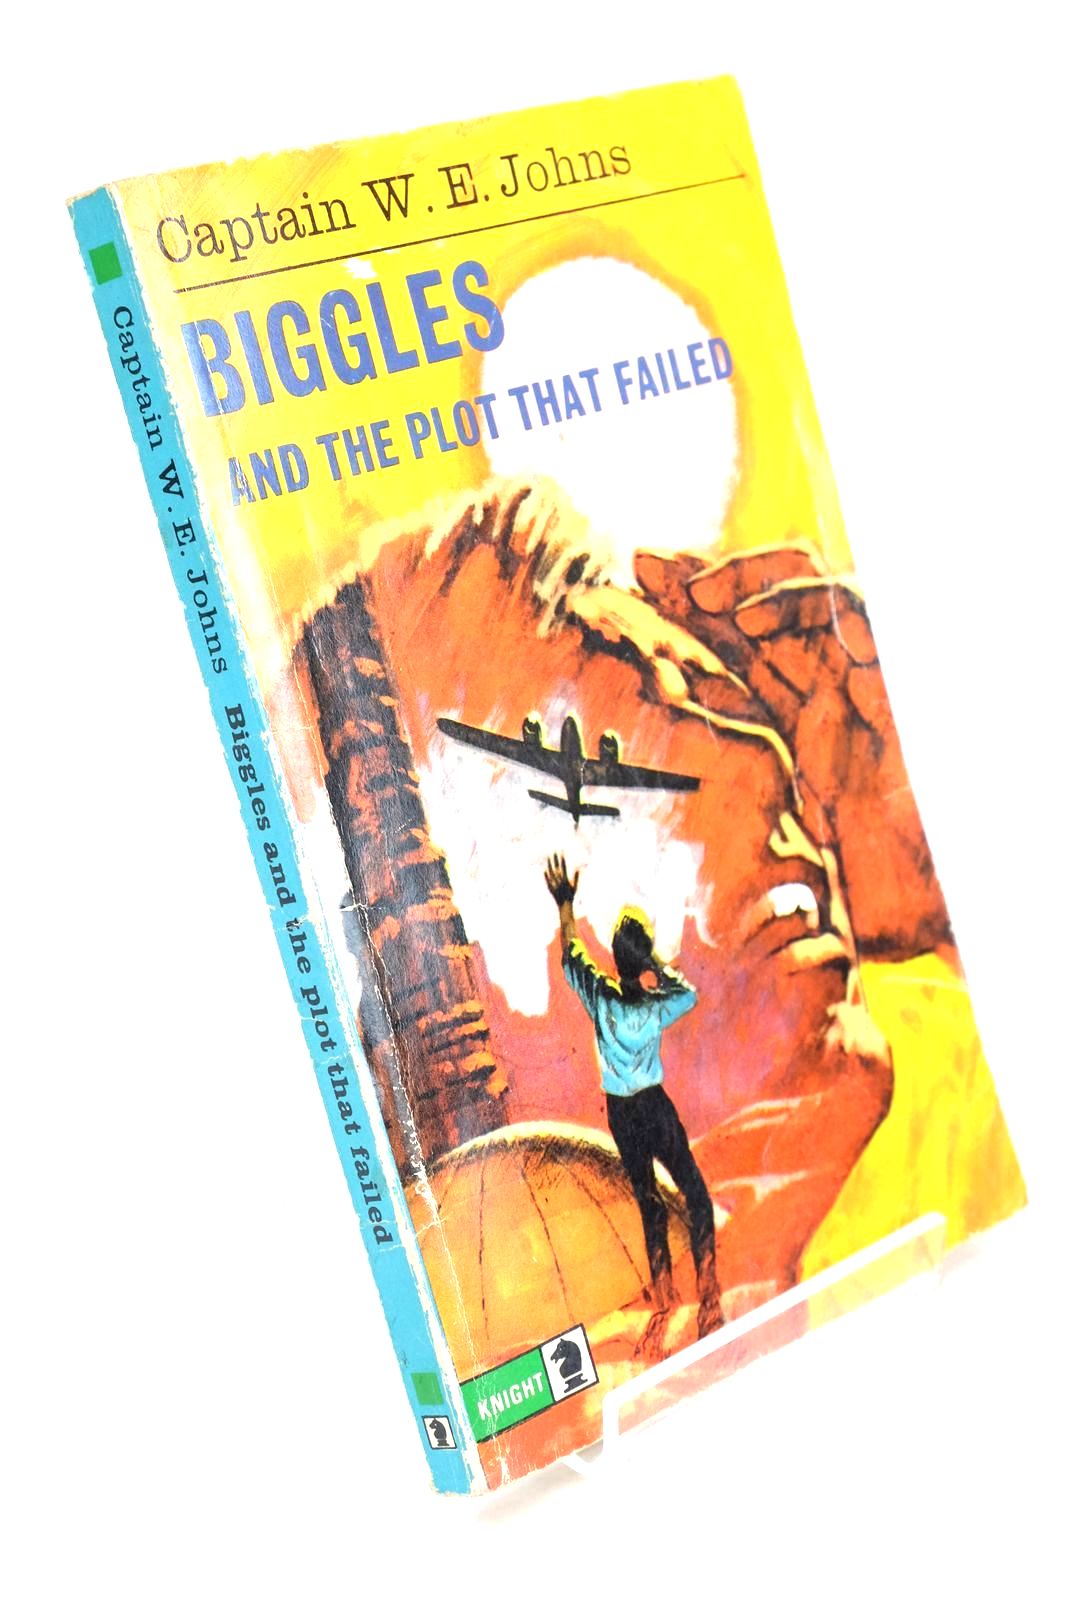 Photo of BIGGLES AND THE PLOT THAT FAILED- Stock Number: 1324846